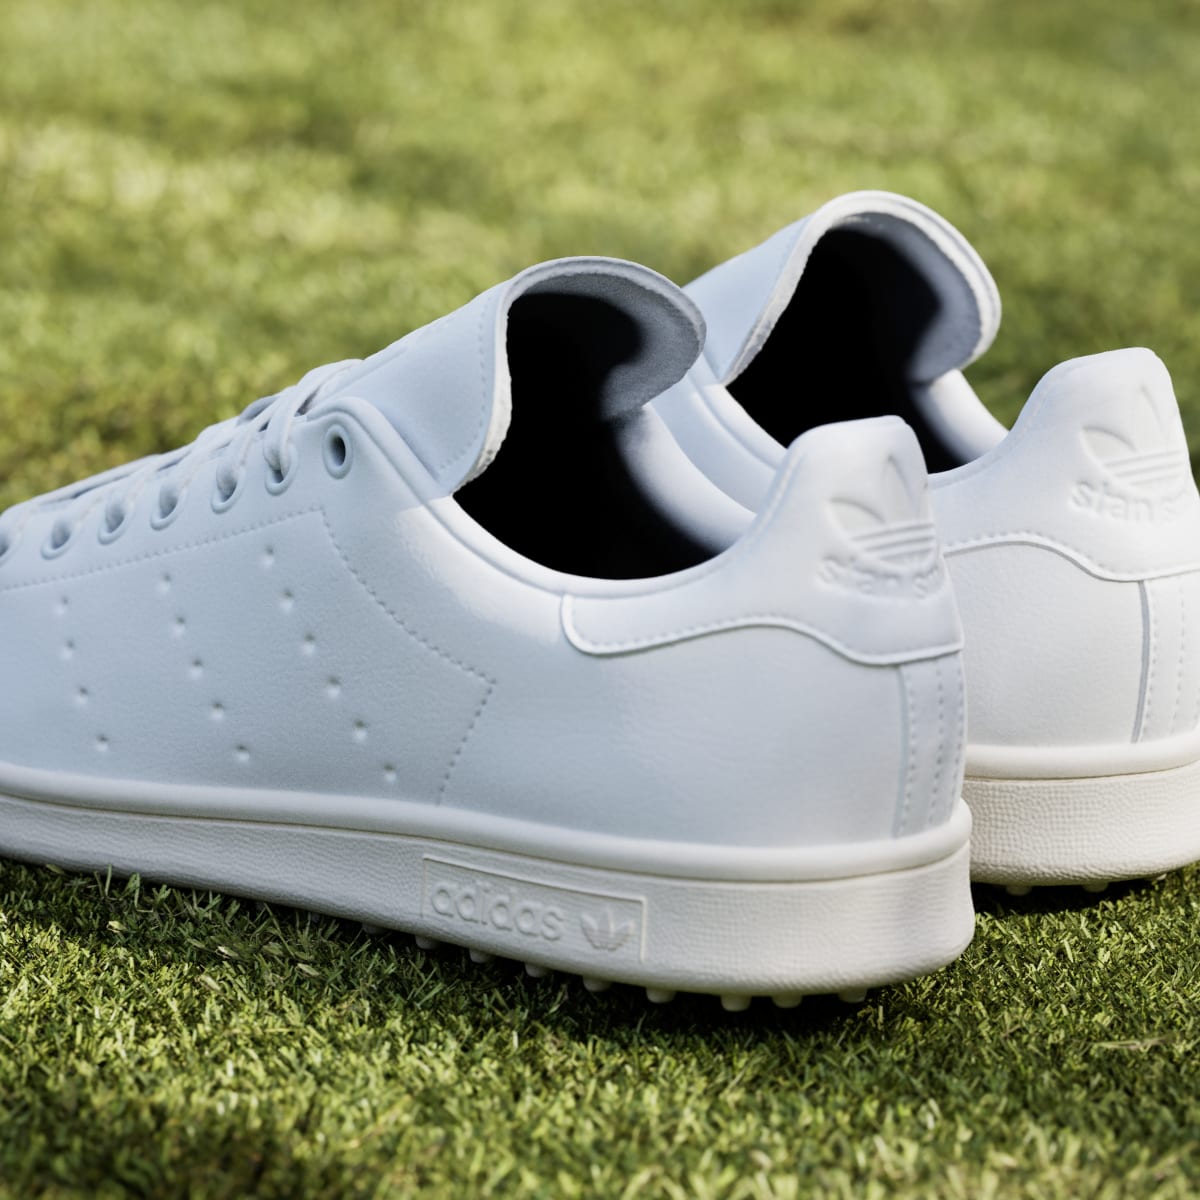 Adidas Stan Smith Golf Shoes. 9